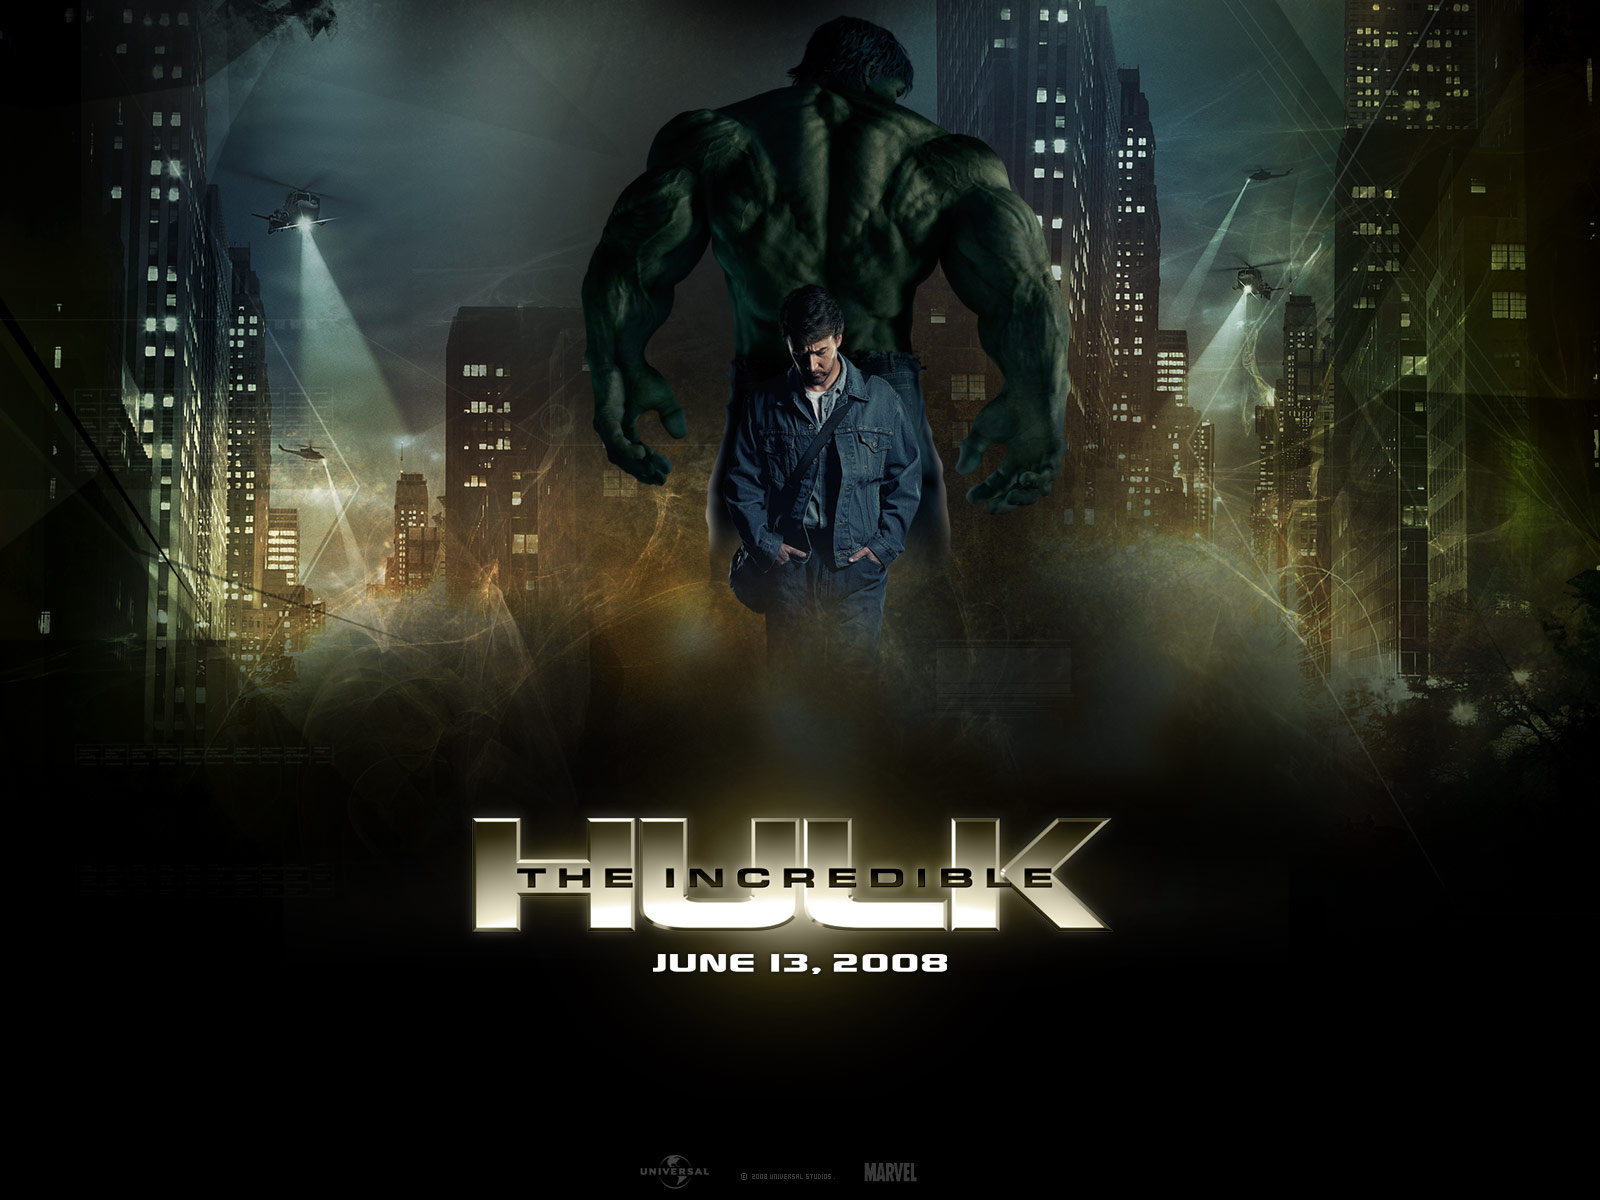 My Movie Review imdb copyright: The Incredible Hulk (2008) - Where Can I Watch The Incredible Hulk 2008